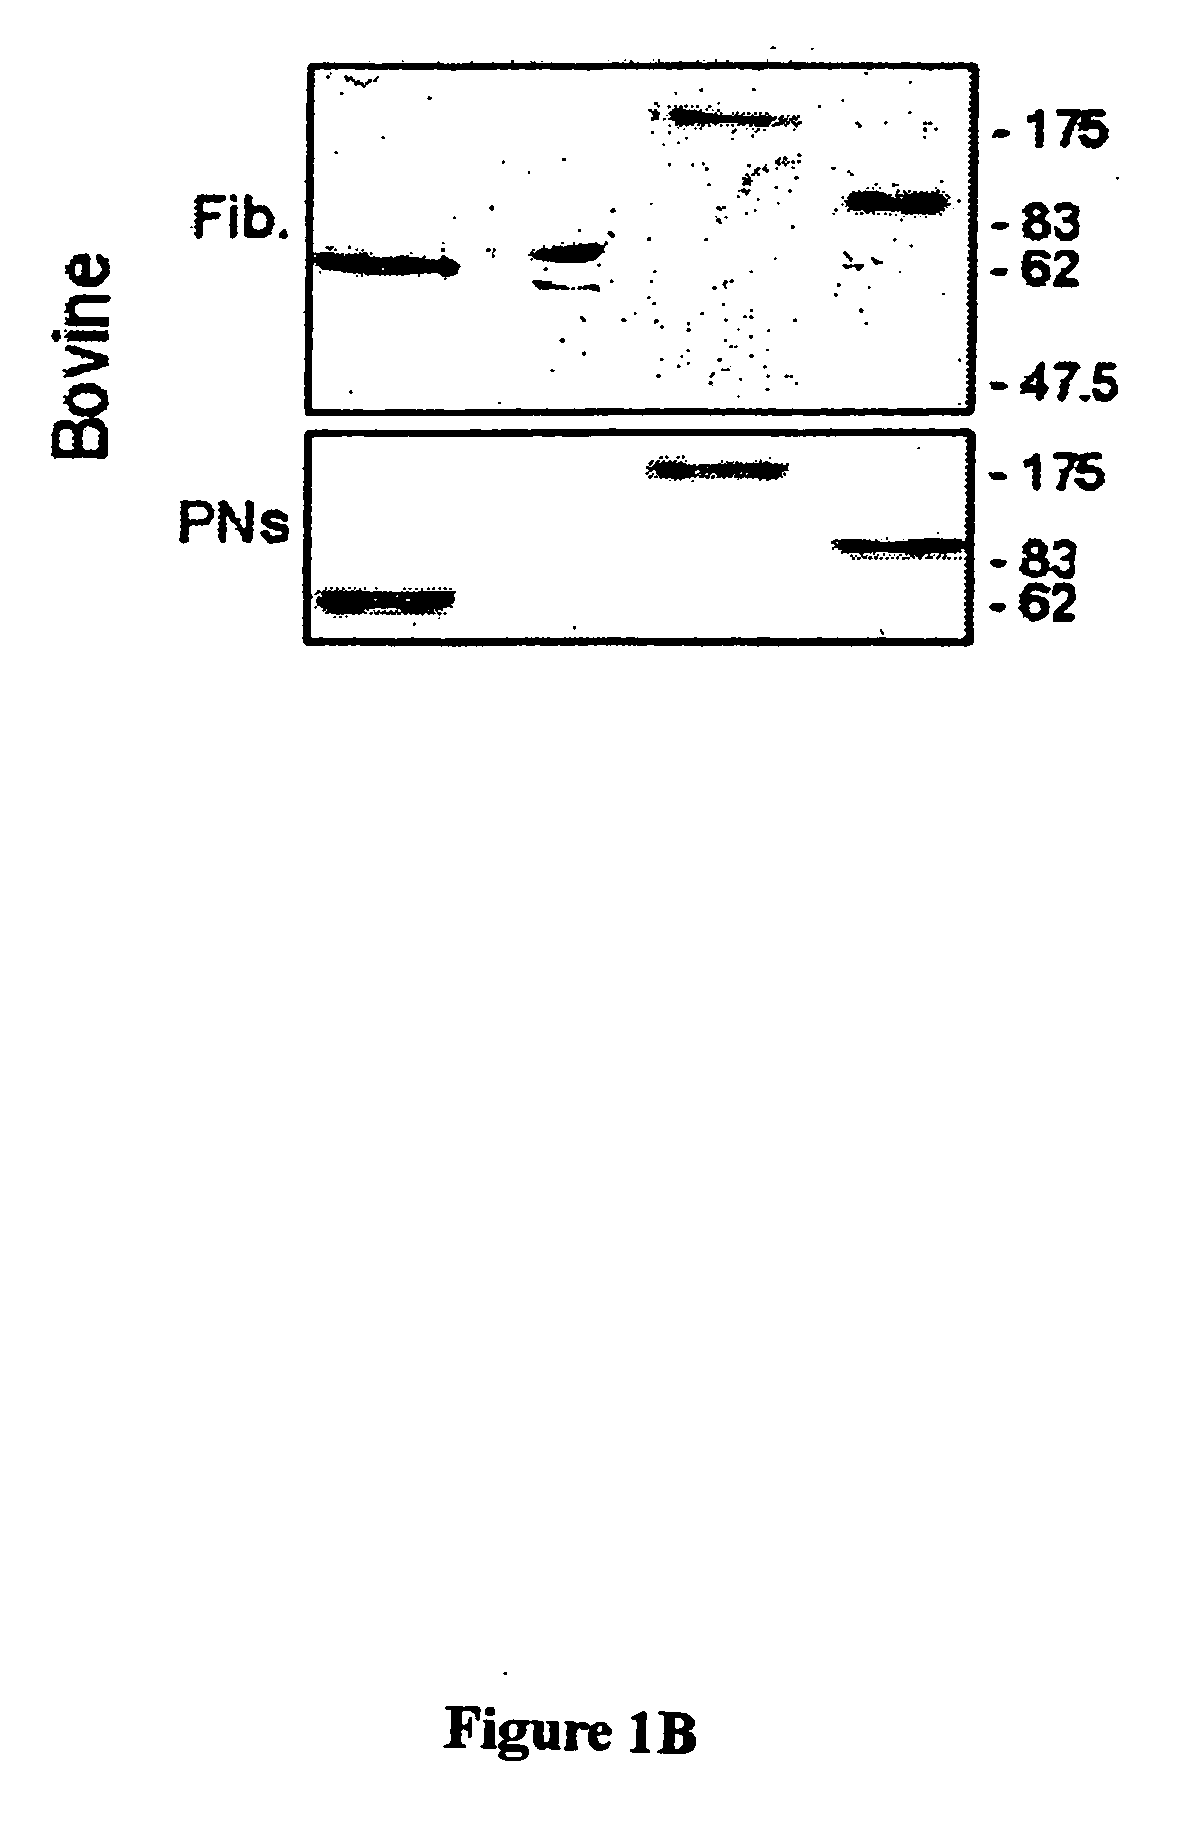 Methods for cloning mammals using reprogrammed donor chromatin or donor cells